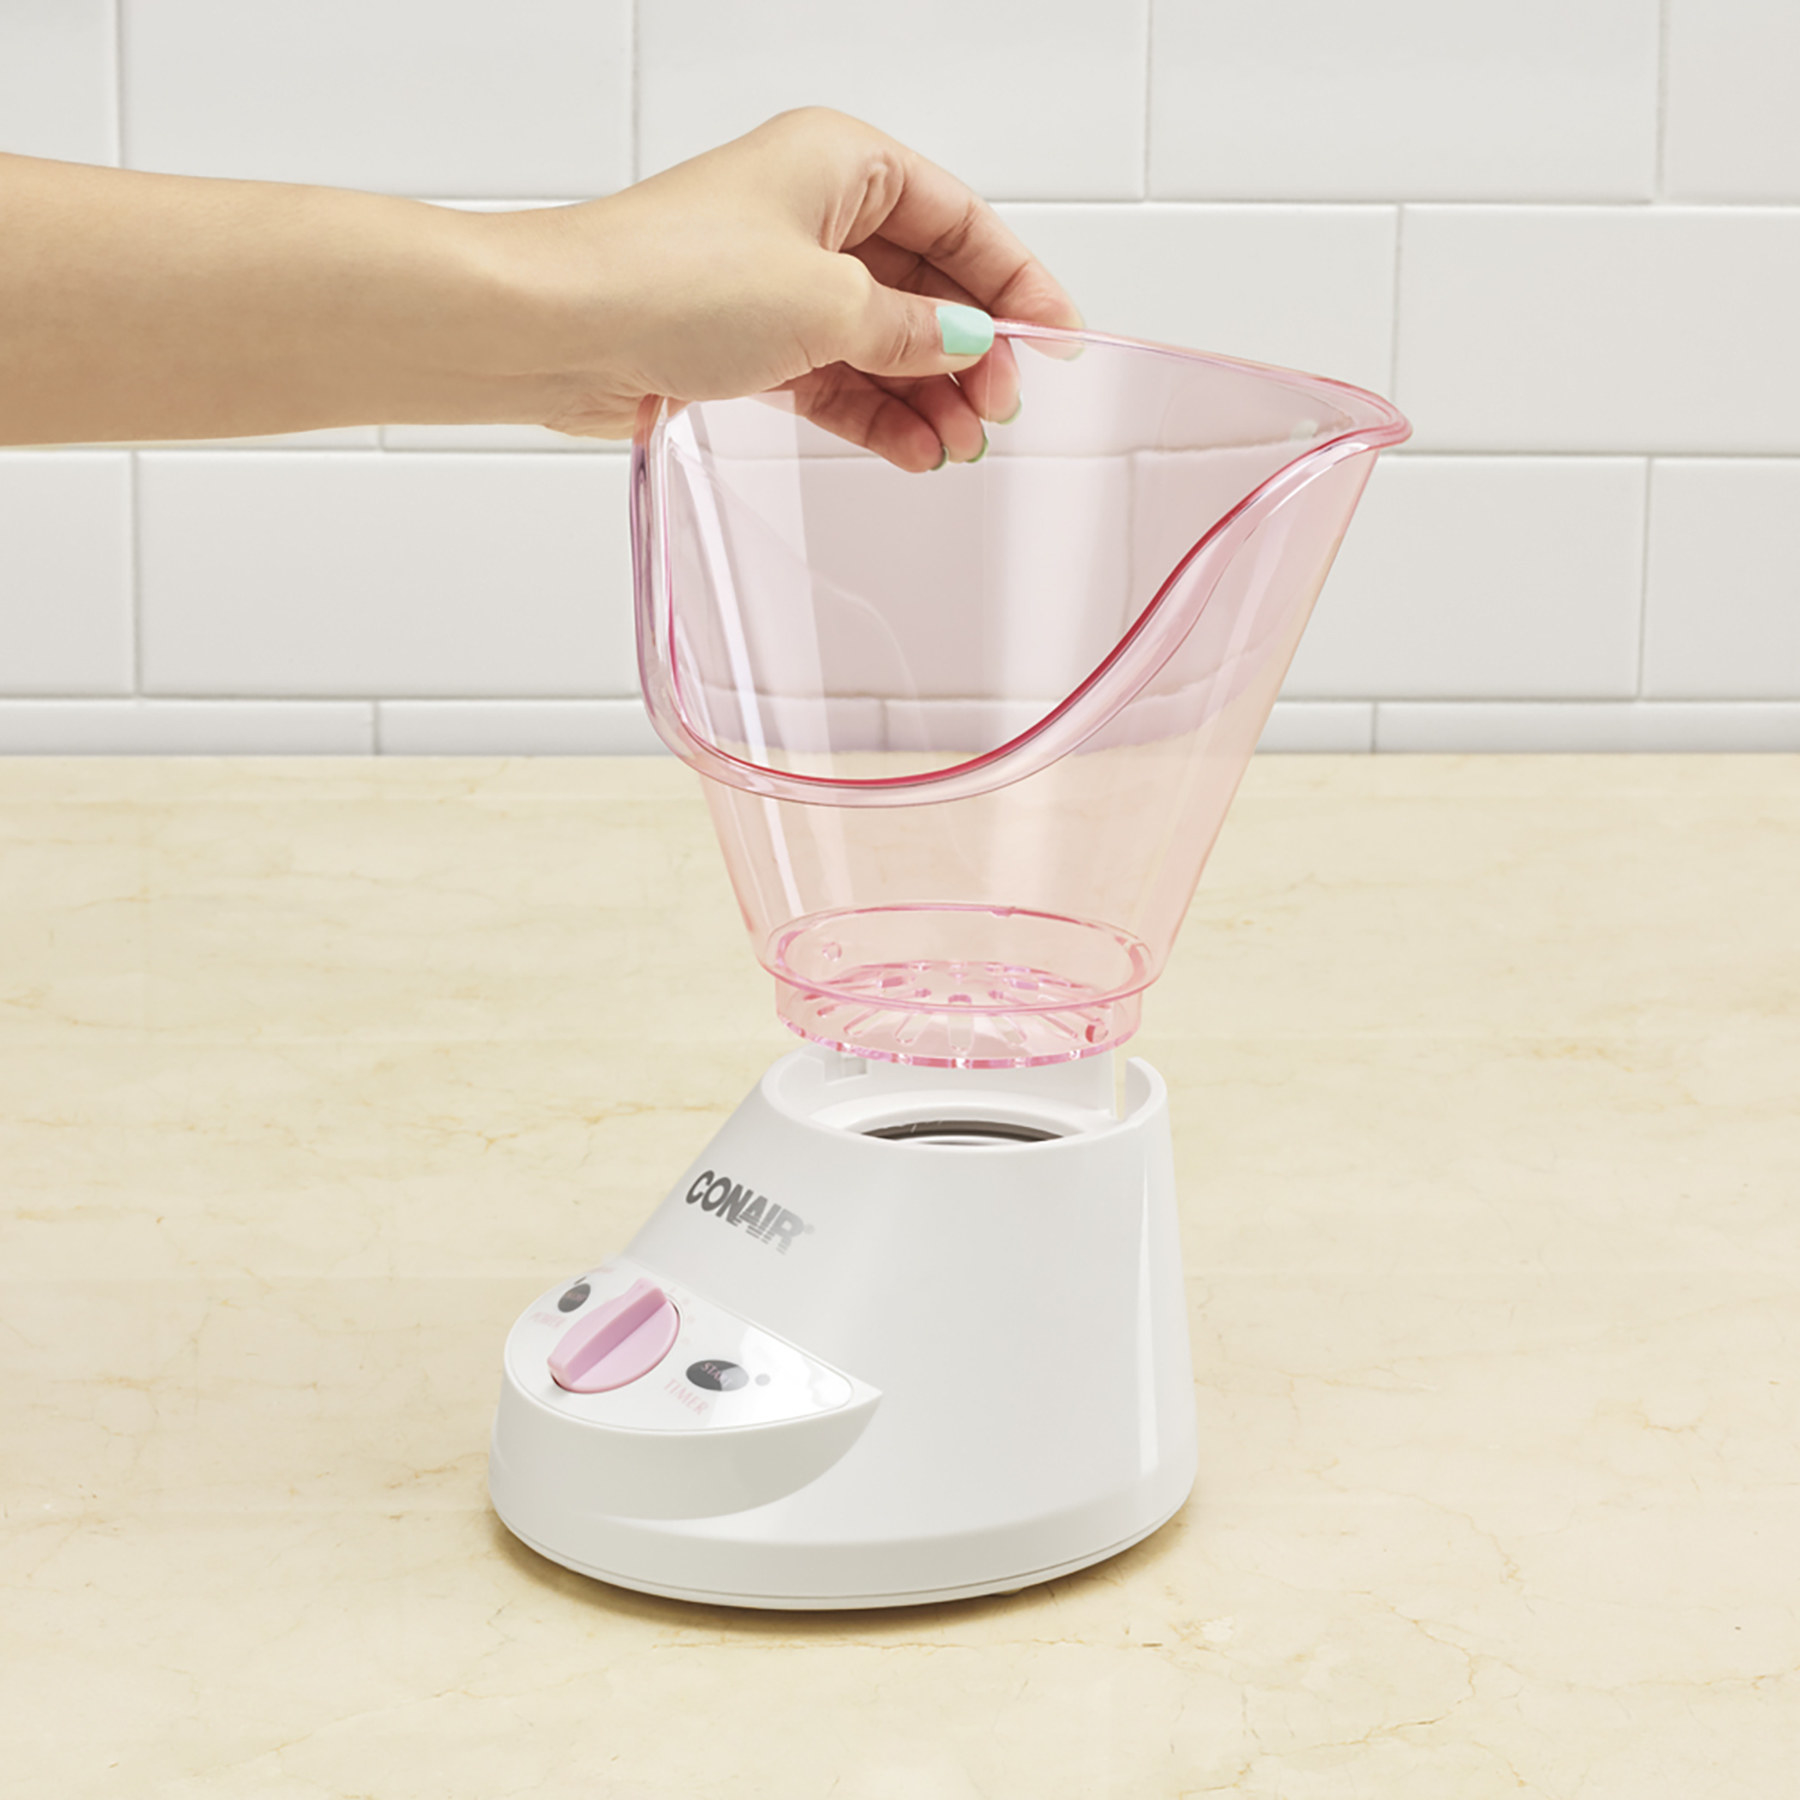 A pink and white volcano shaped facial steamer on a counter